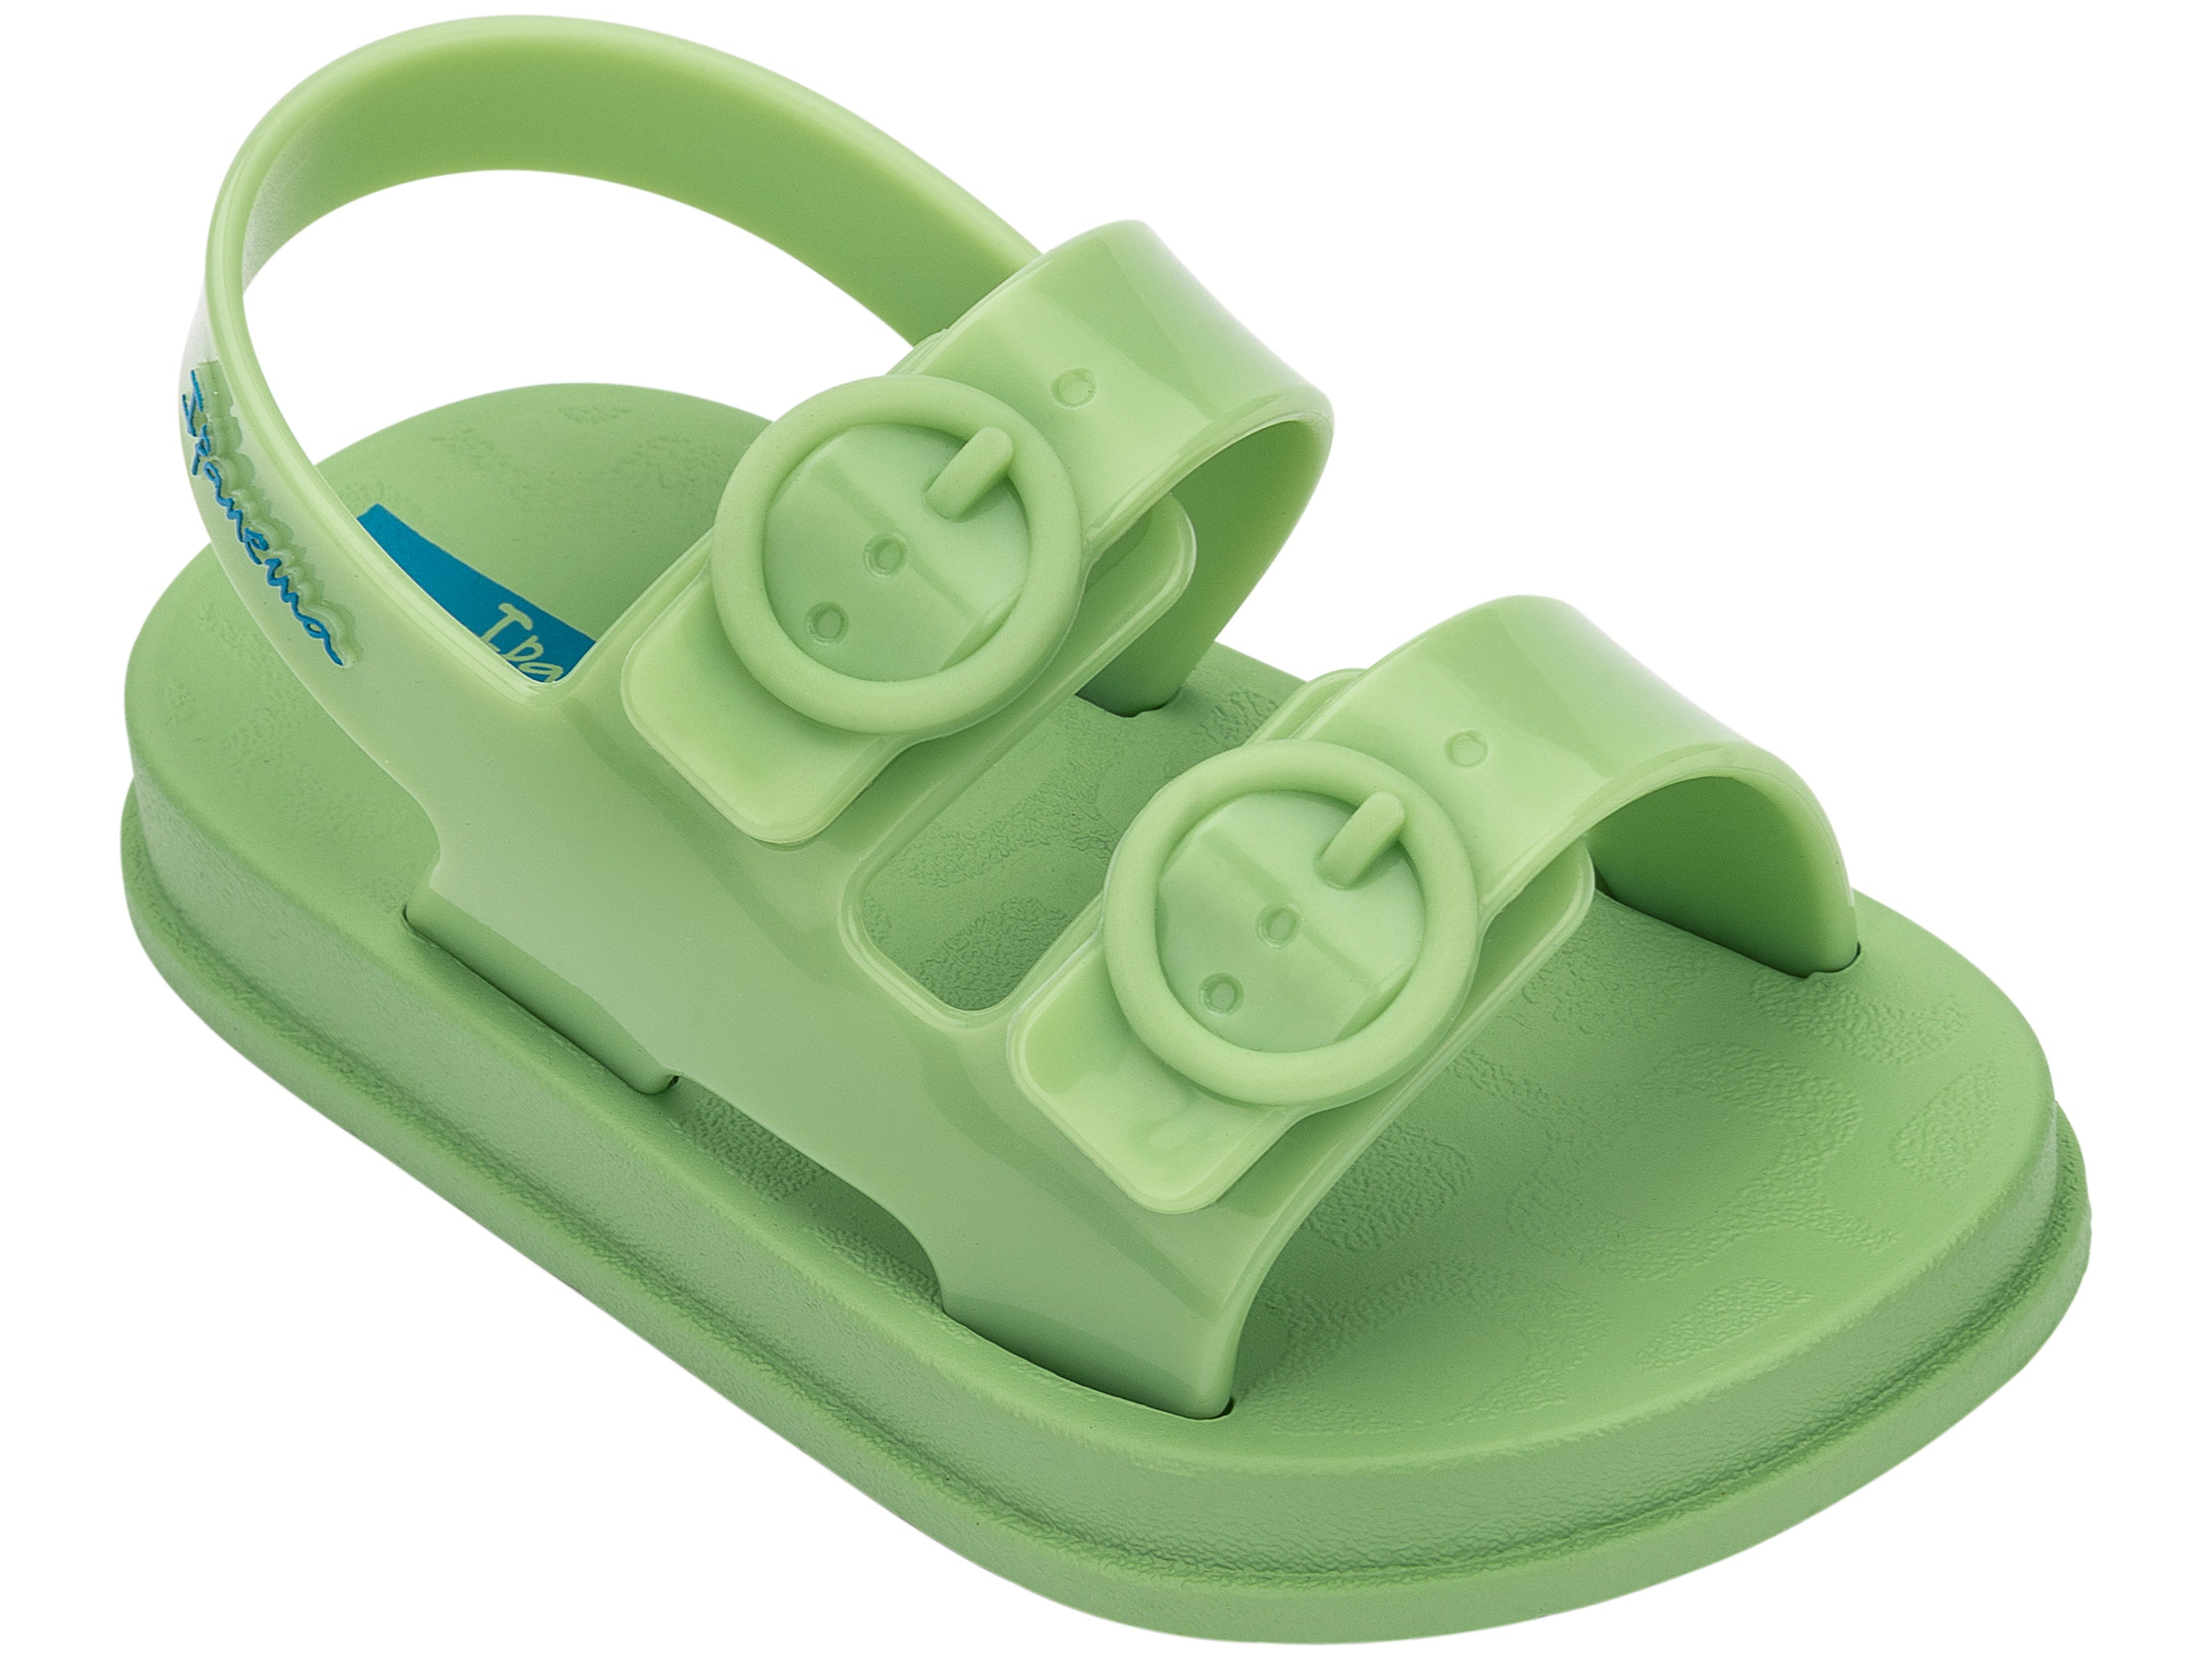 Angled view of a green Ipanema Follow baby sandal with two decorative buckles on the upper.